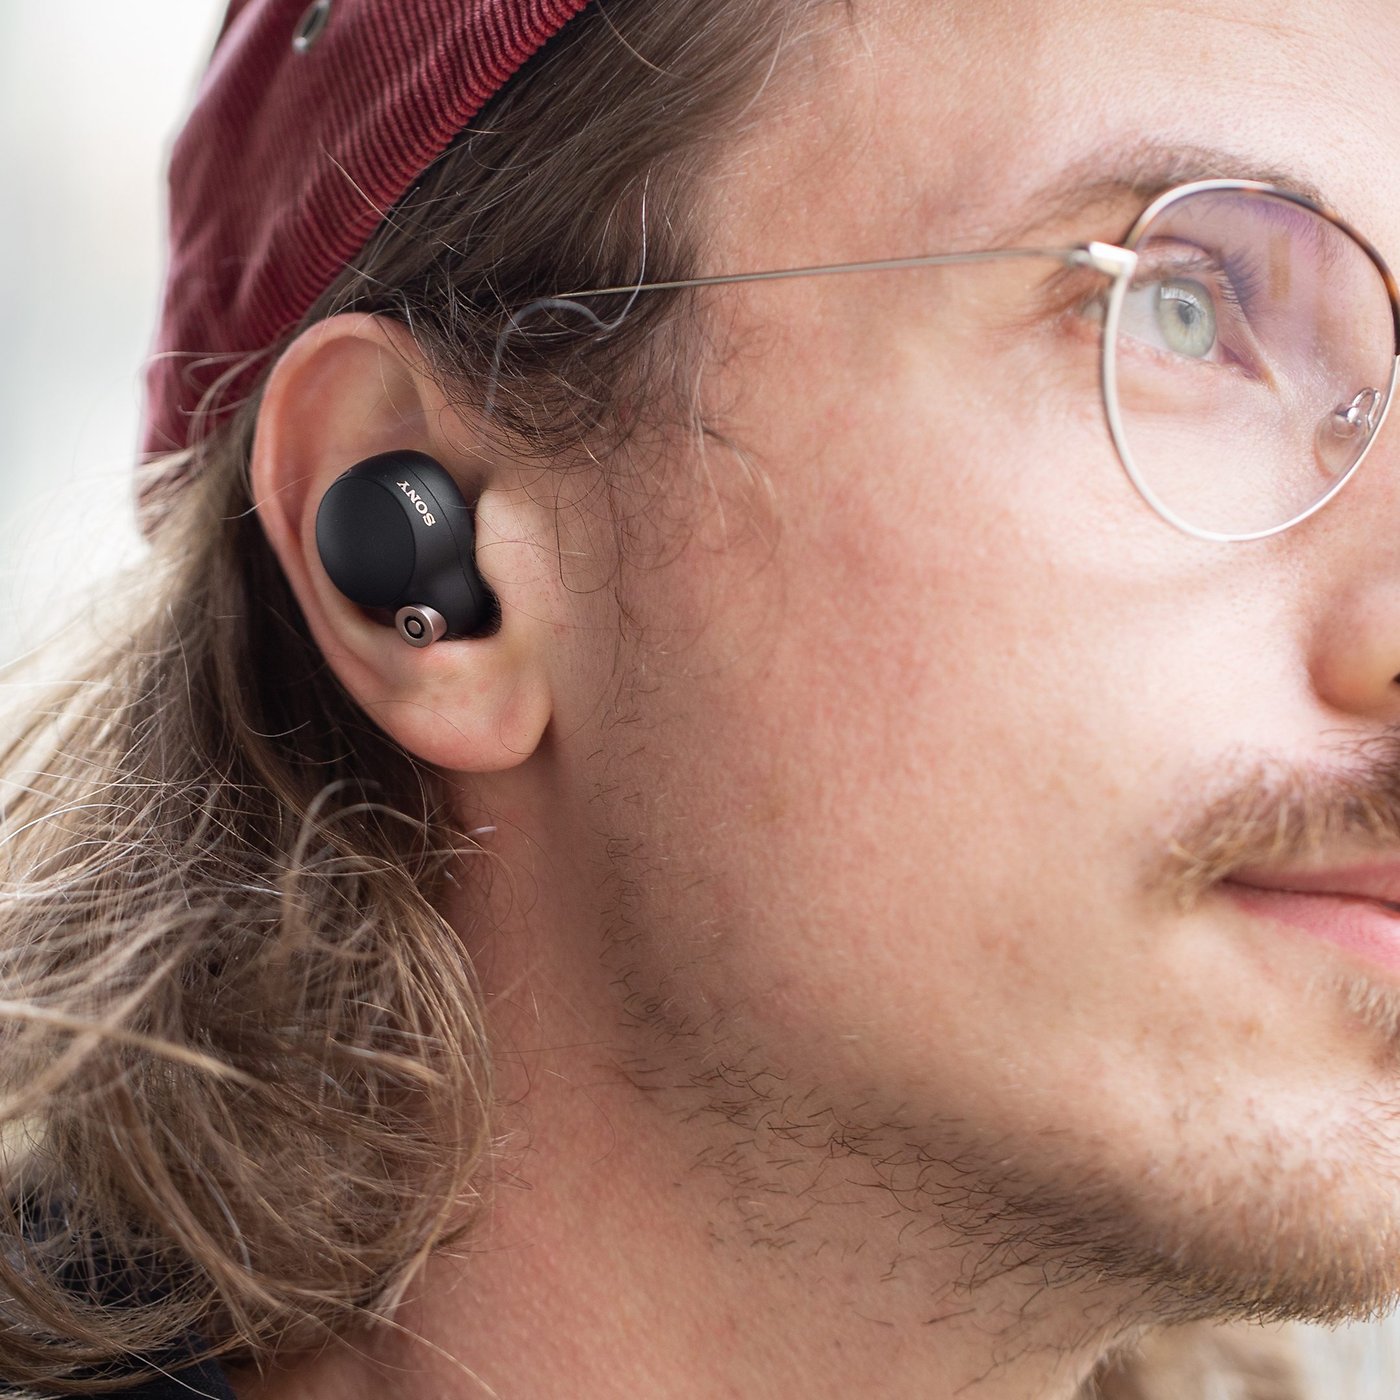 Sony WF-1000XM4 wireless earbuds review: entertaining and musical in-ears